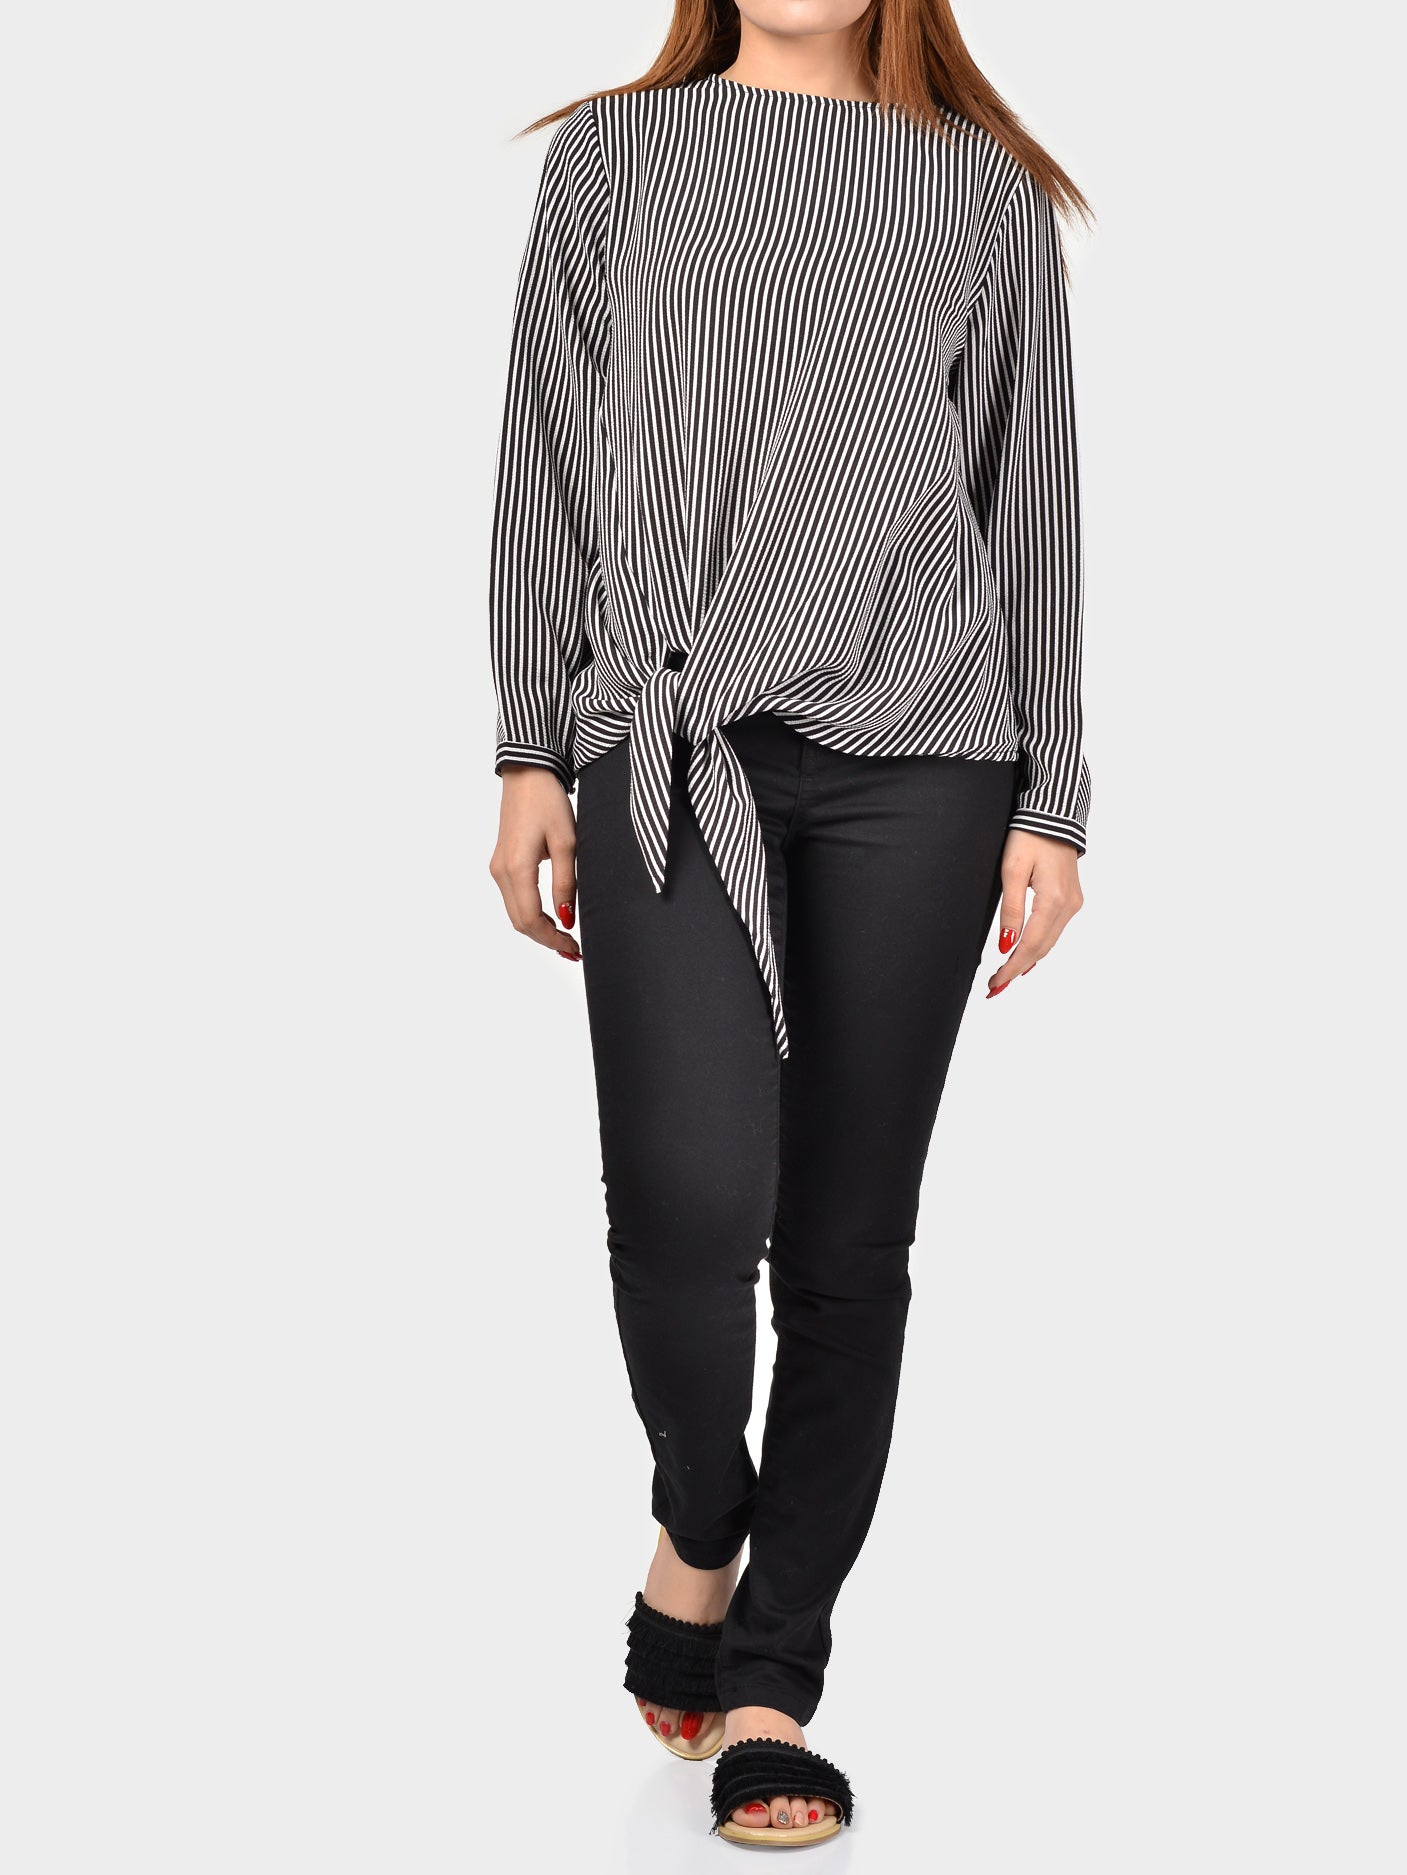 Knotted Top